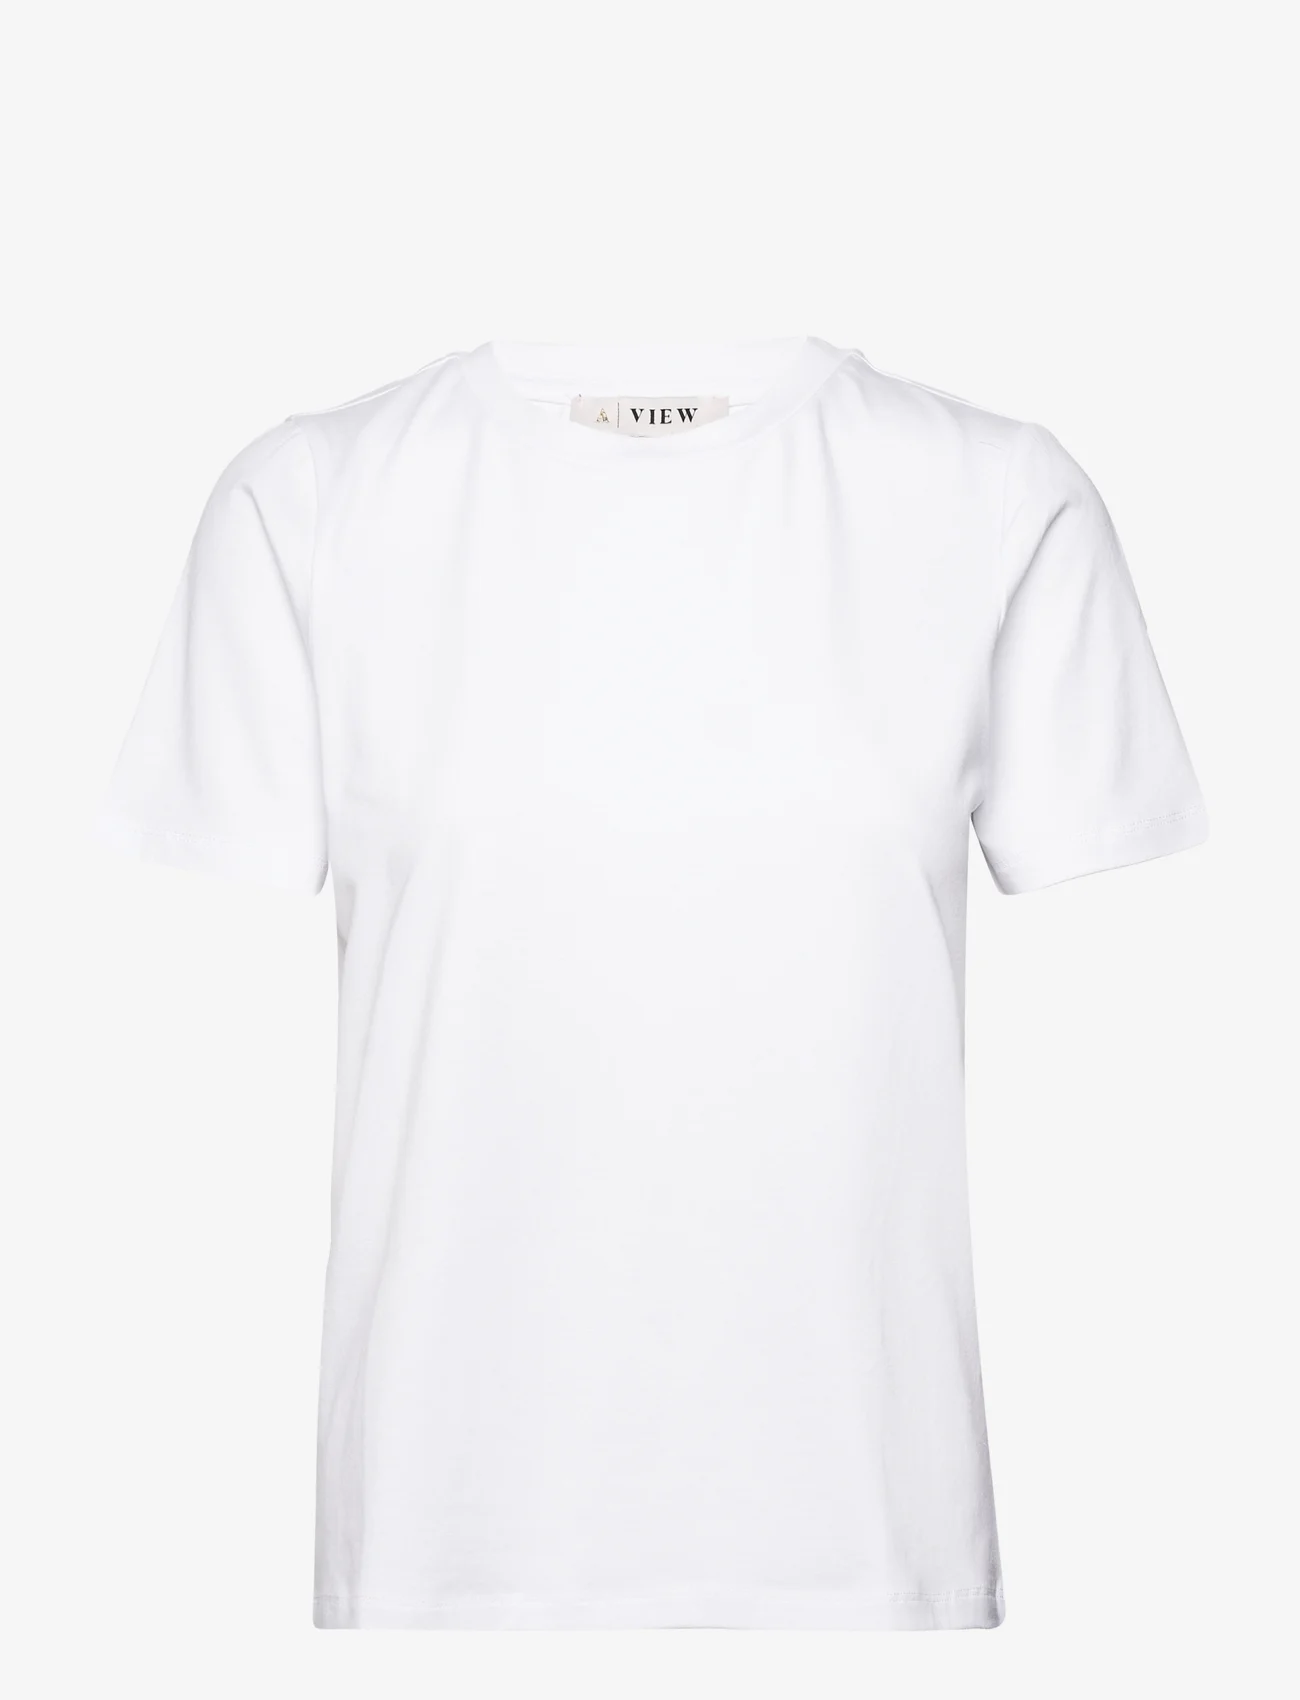 A-View - Stabil top s/s - t-shirts - white - 0